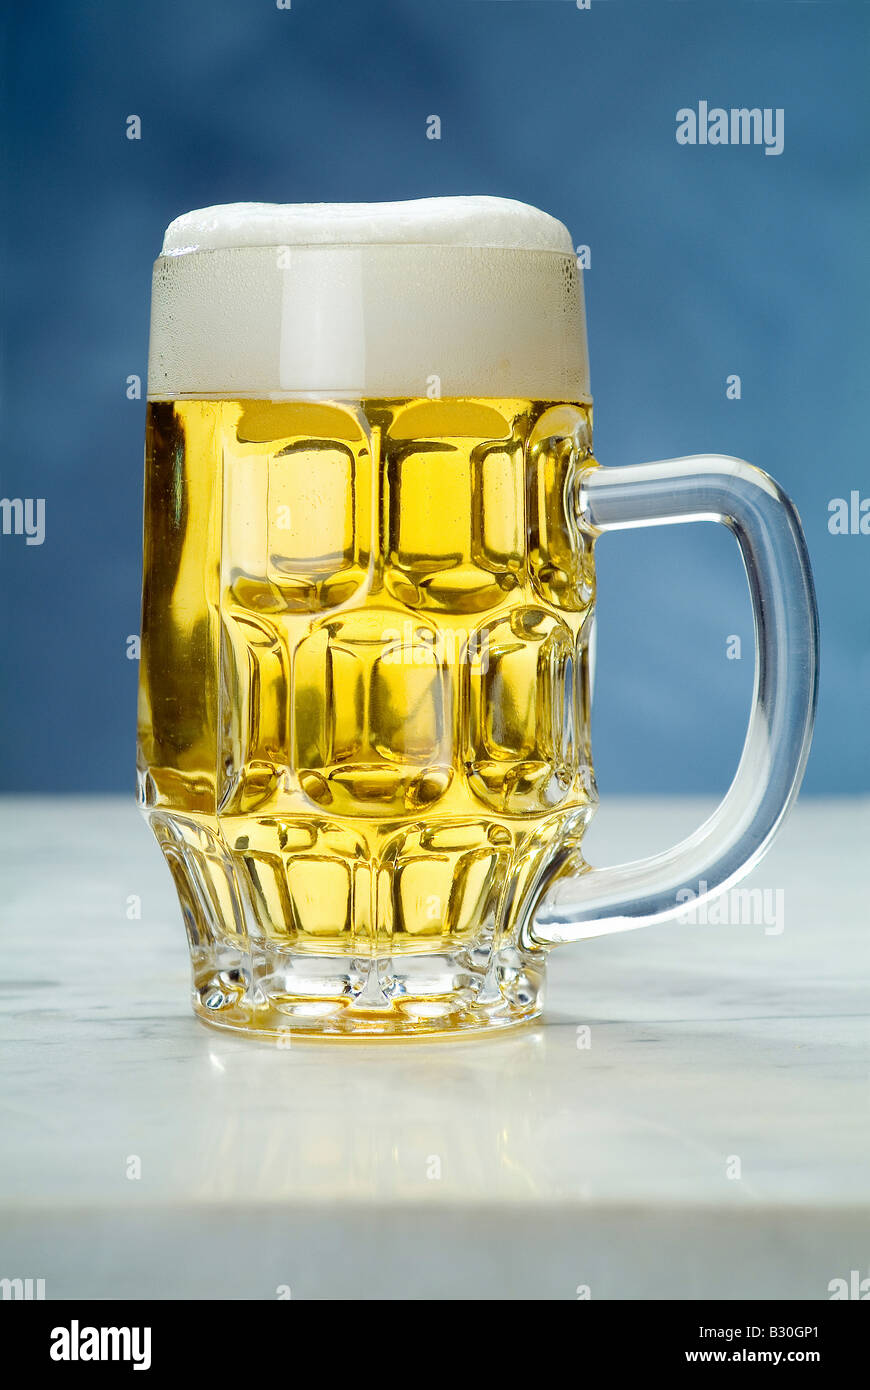 A beer jug on blue background Stock Photo